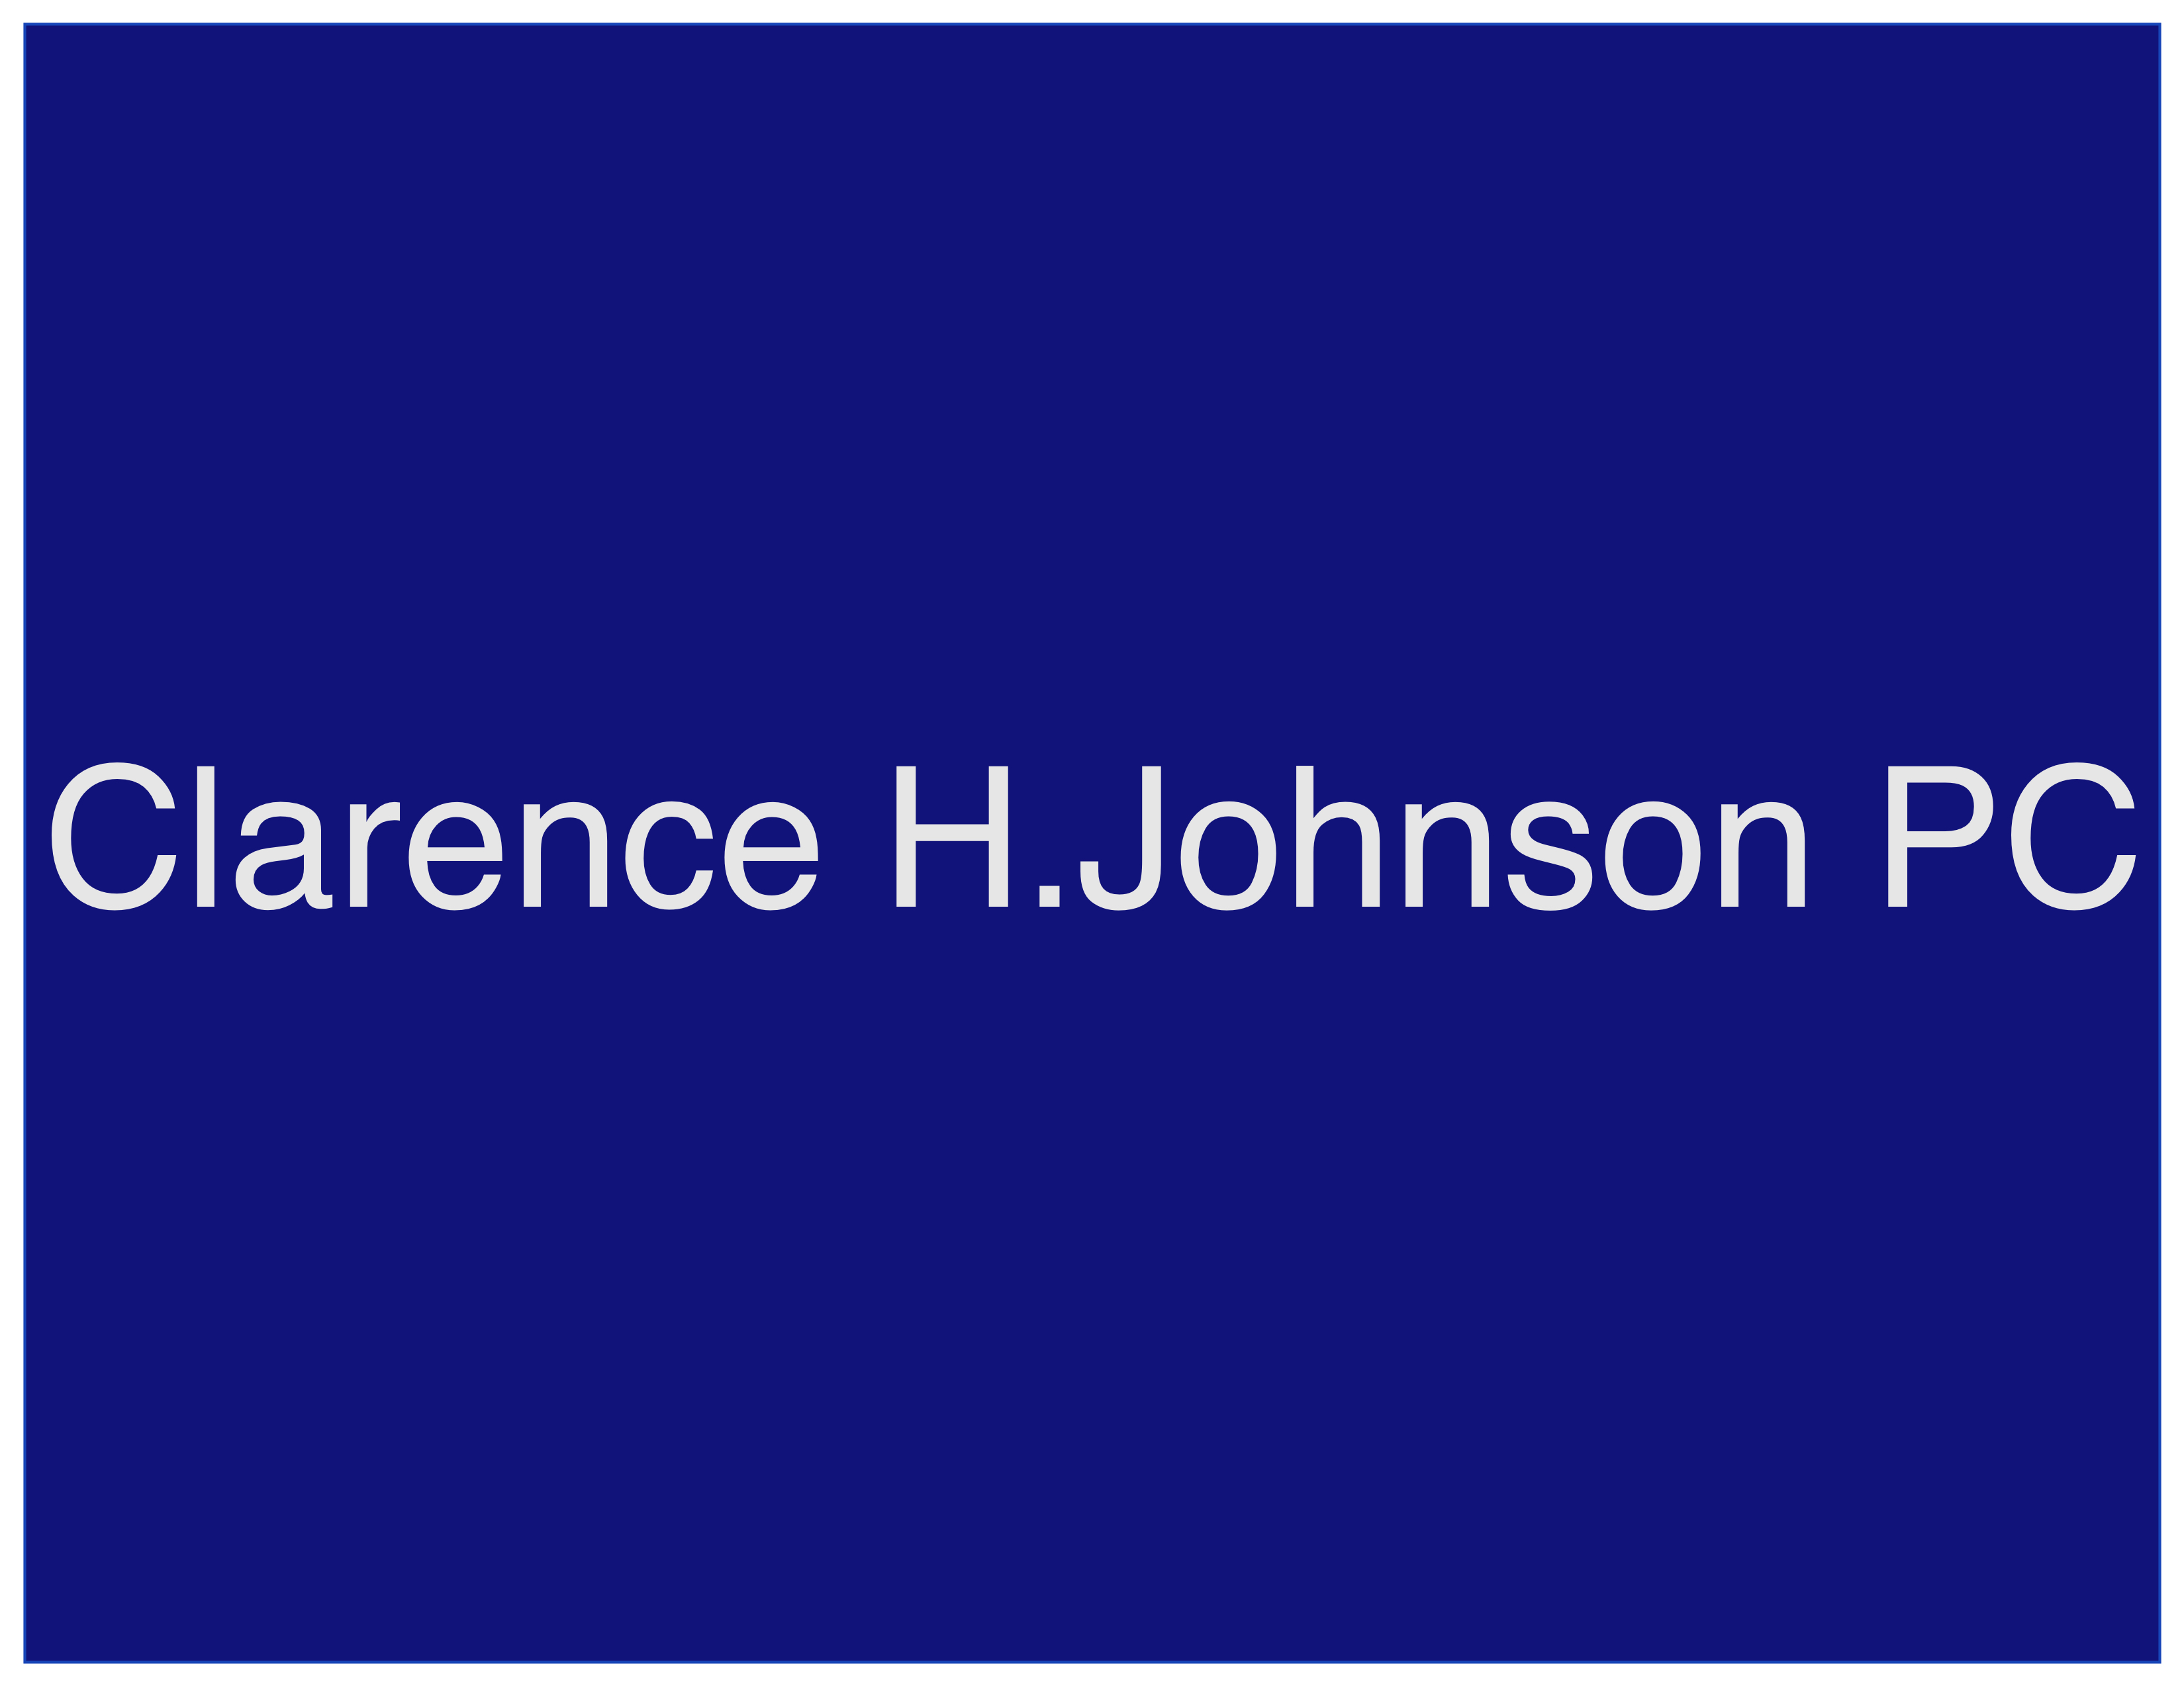 Clarence H. Johnson 